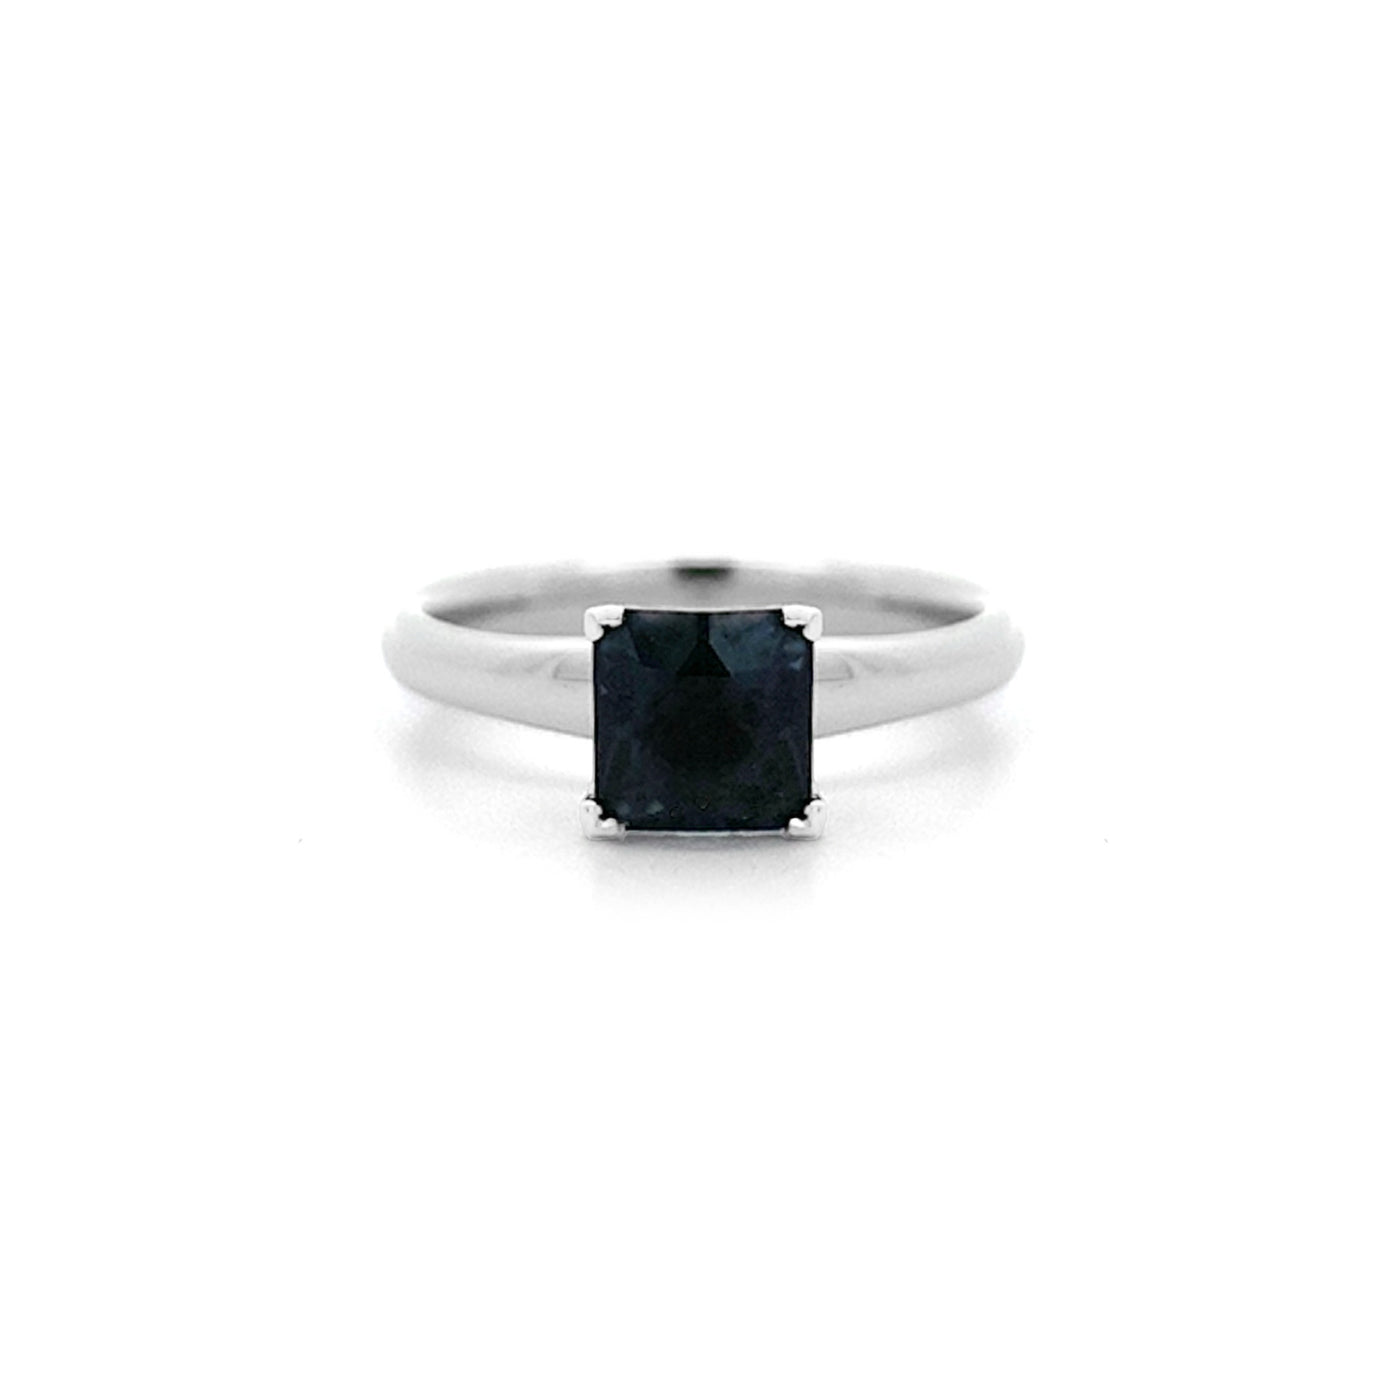 Black Spinel Solitaire Ring in Platinum